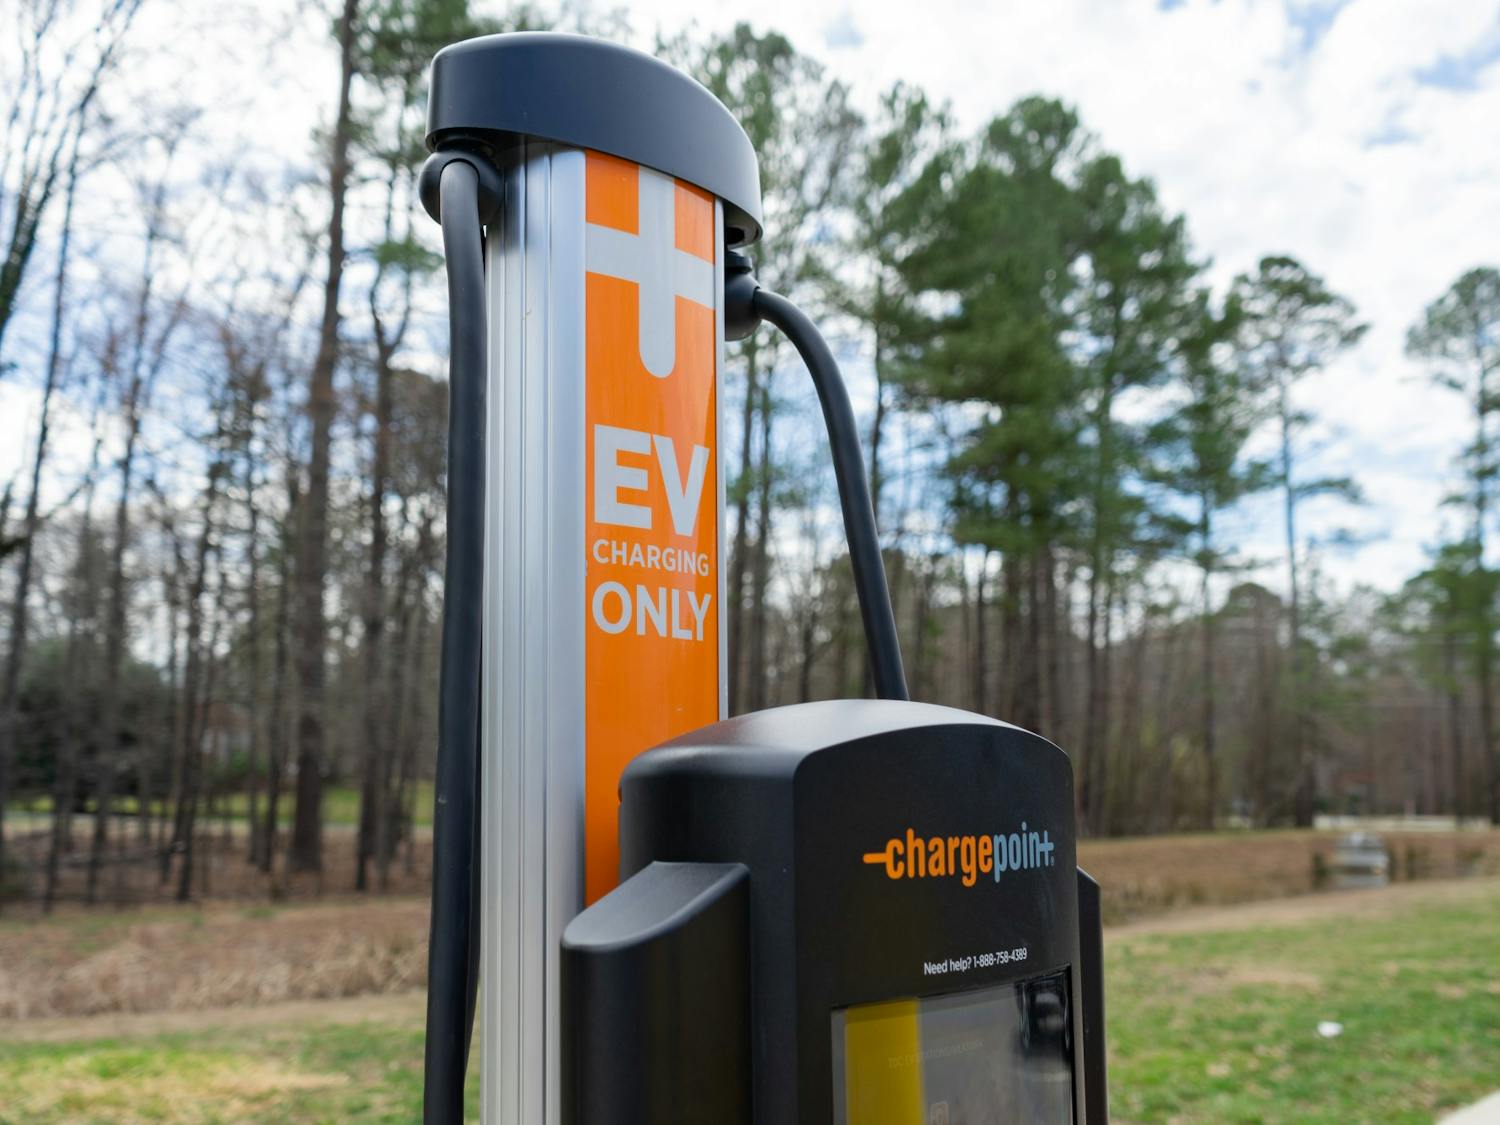 An EV charging station sits in the parking lot of Martin Luther King Jr. Park in Carrboro, NC on Thursday, Mar. 3, 2022. This is one of two EV charging stations recently added in the Town of Carrboro.